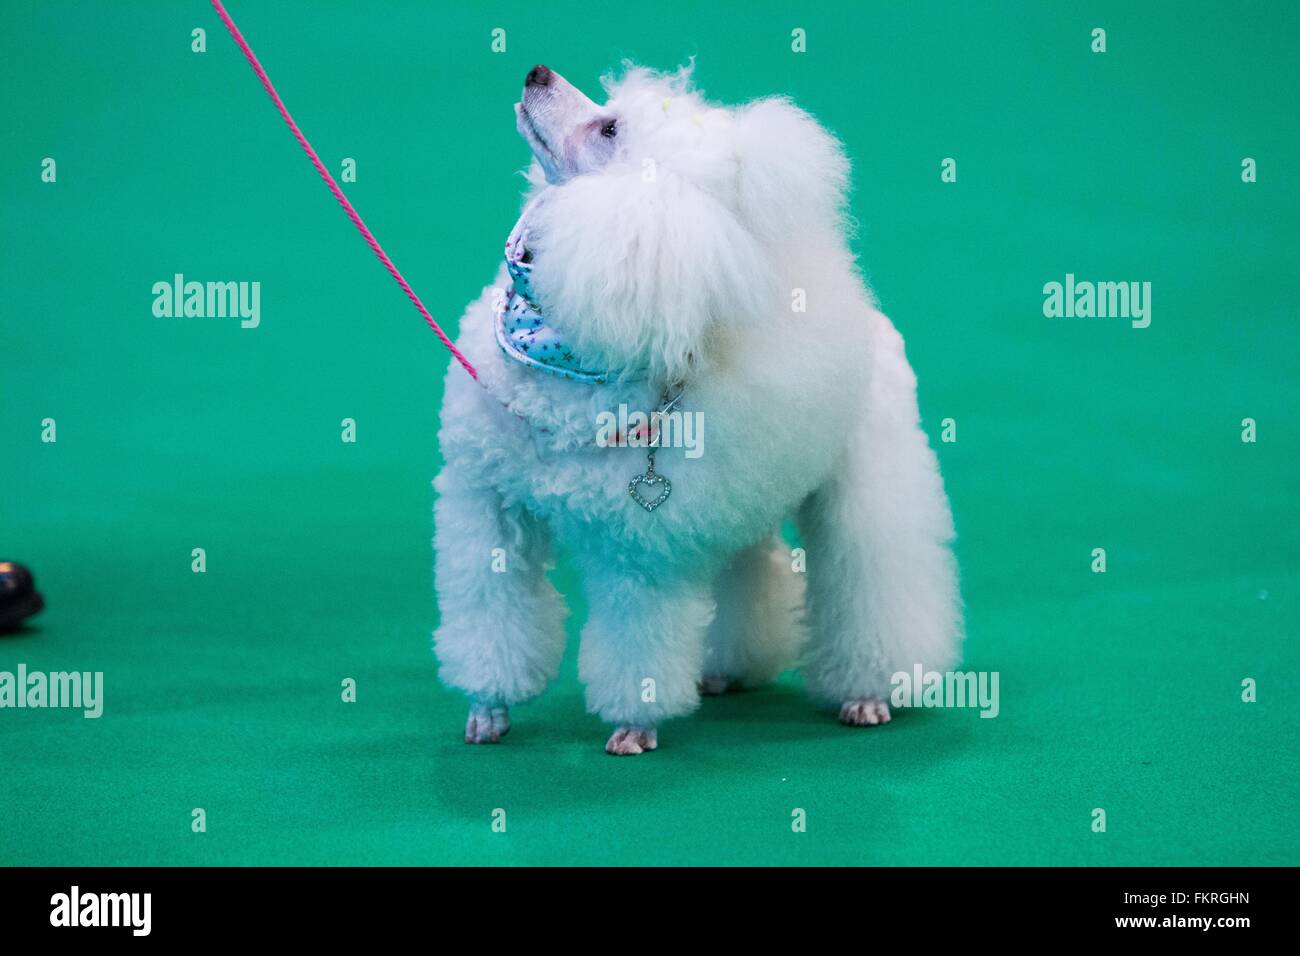 Birmingham, UK. 10th March, 2016. A Miniature Poodle looks up to his owner at Crufts 2016. Credit: Jon Freeman/Alamy Live News Stock Photo